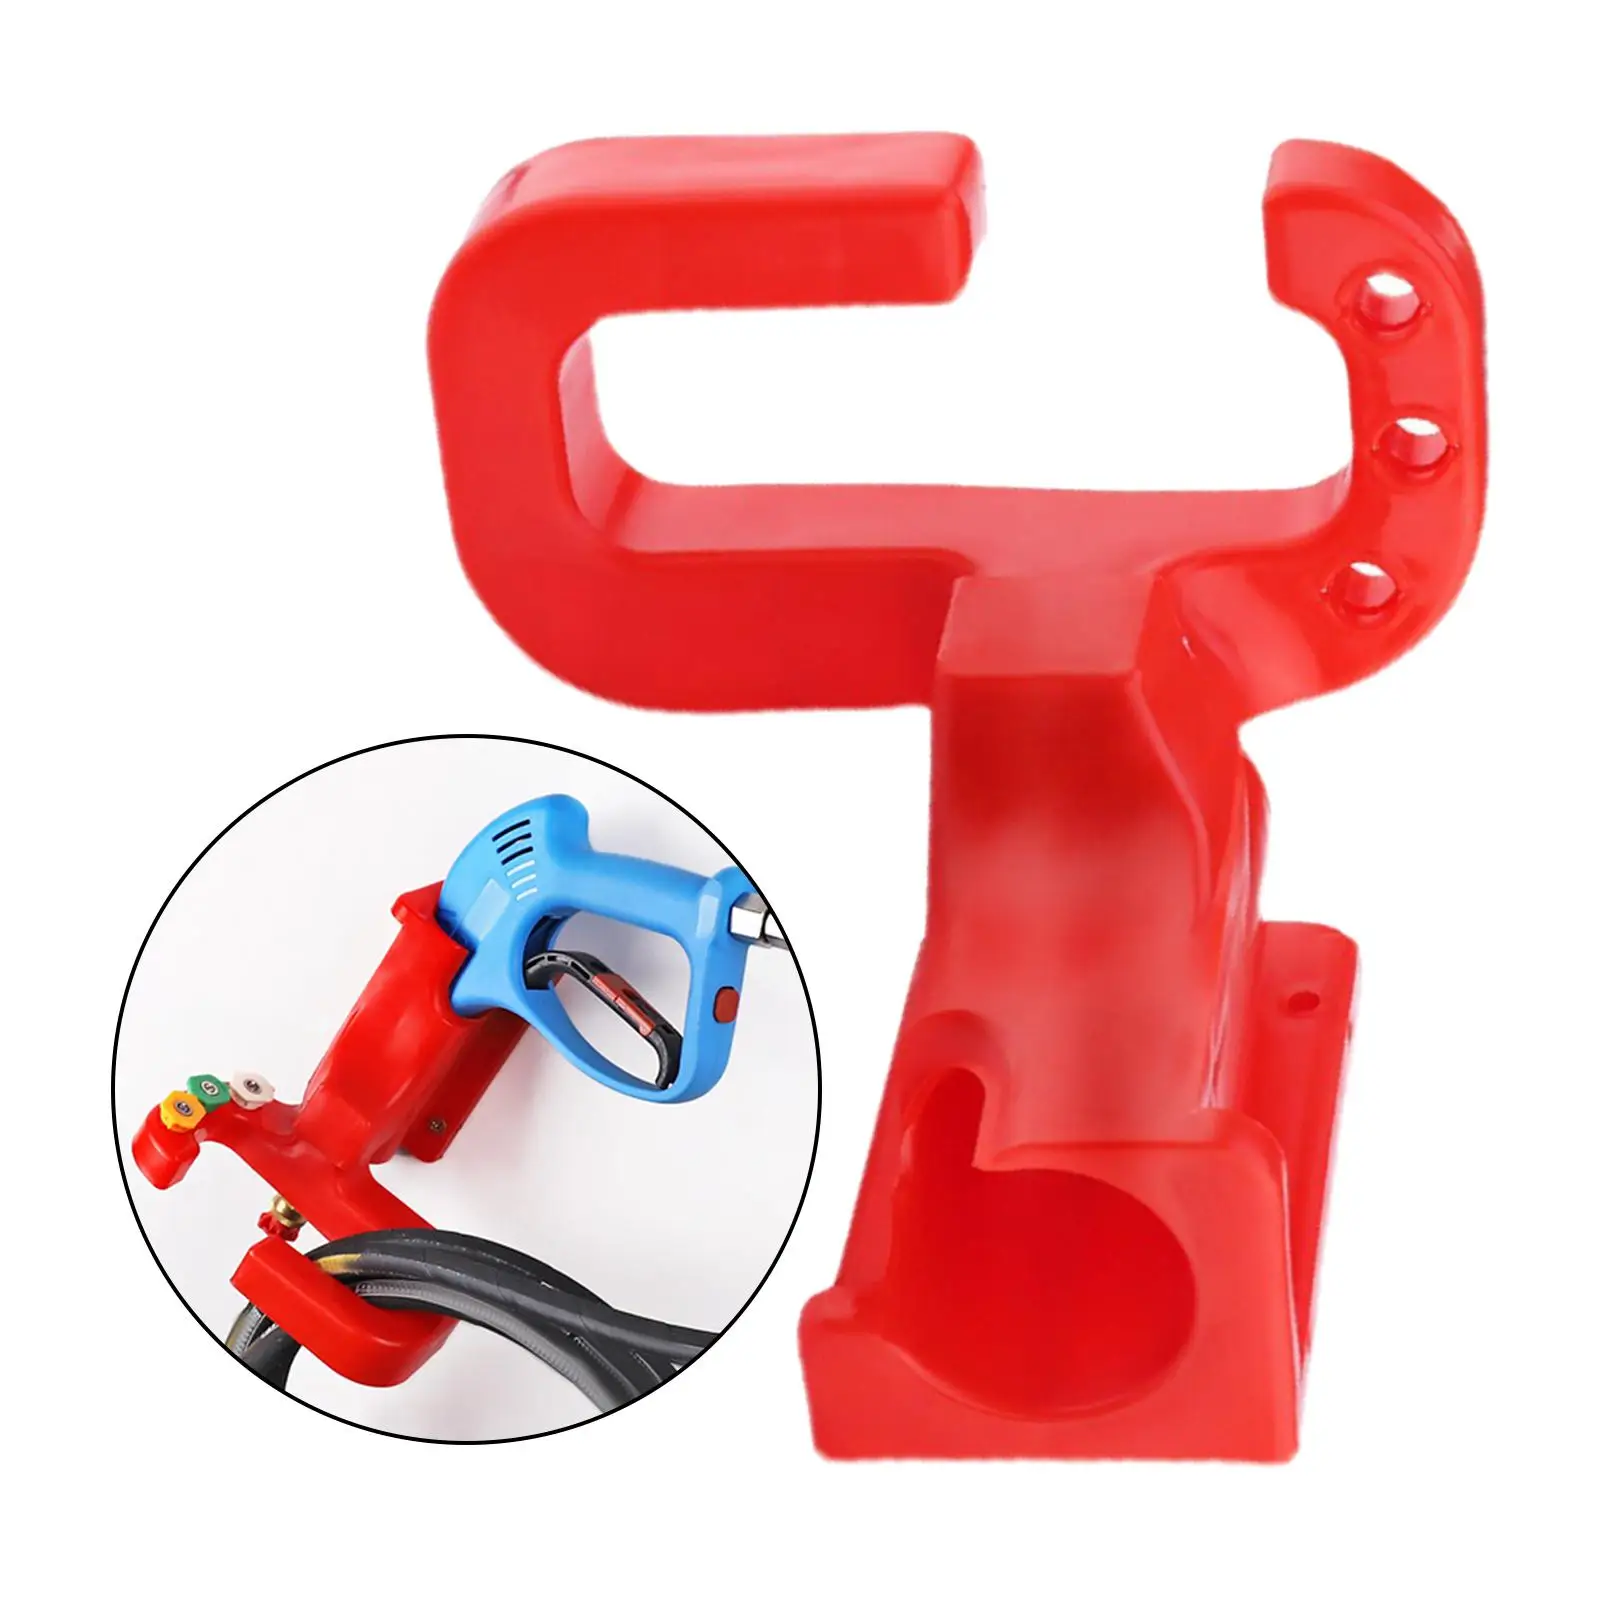 Car Washer Nozzle Holder Durable Multifunctional Hose Tools Hanger Wall Mount Spray Nozzle Holder for Garage Wall Workshop